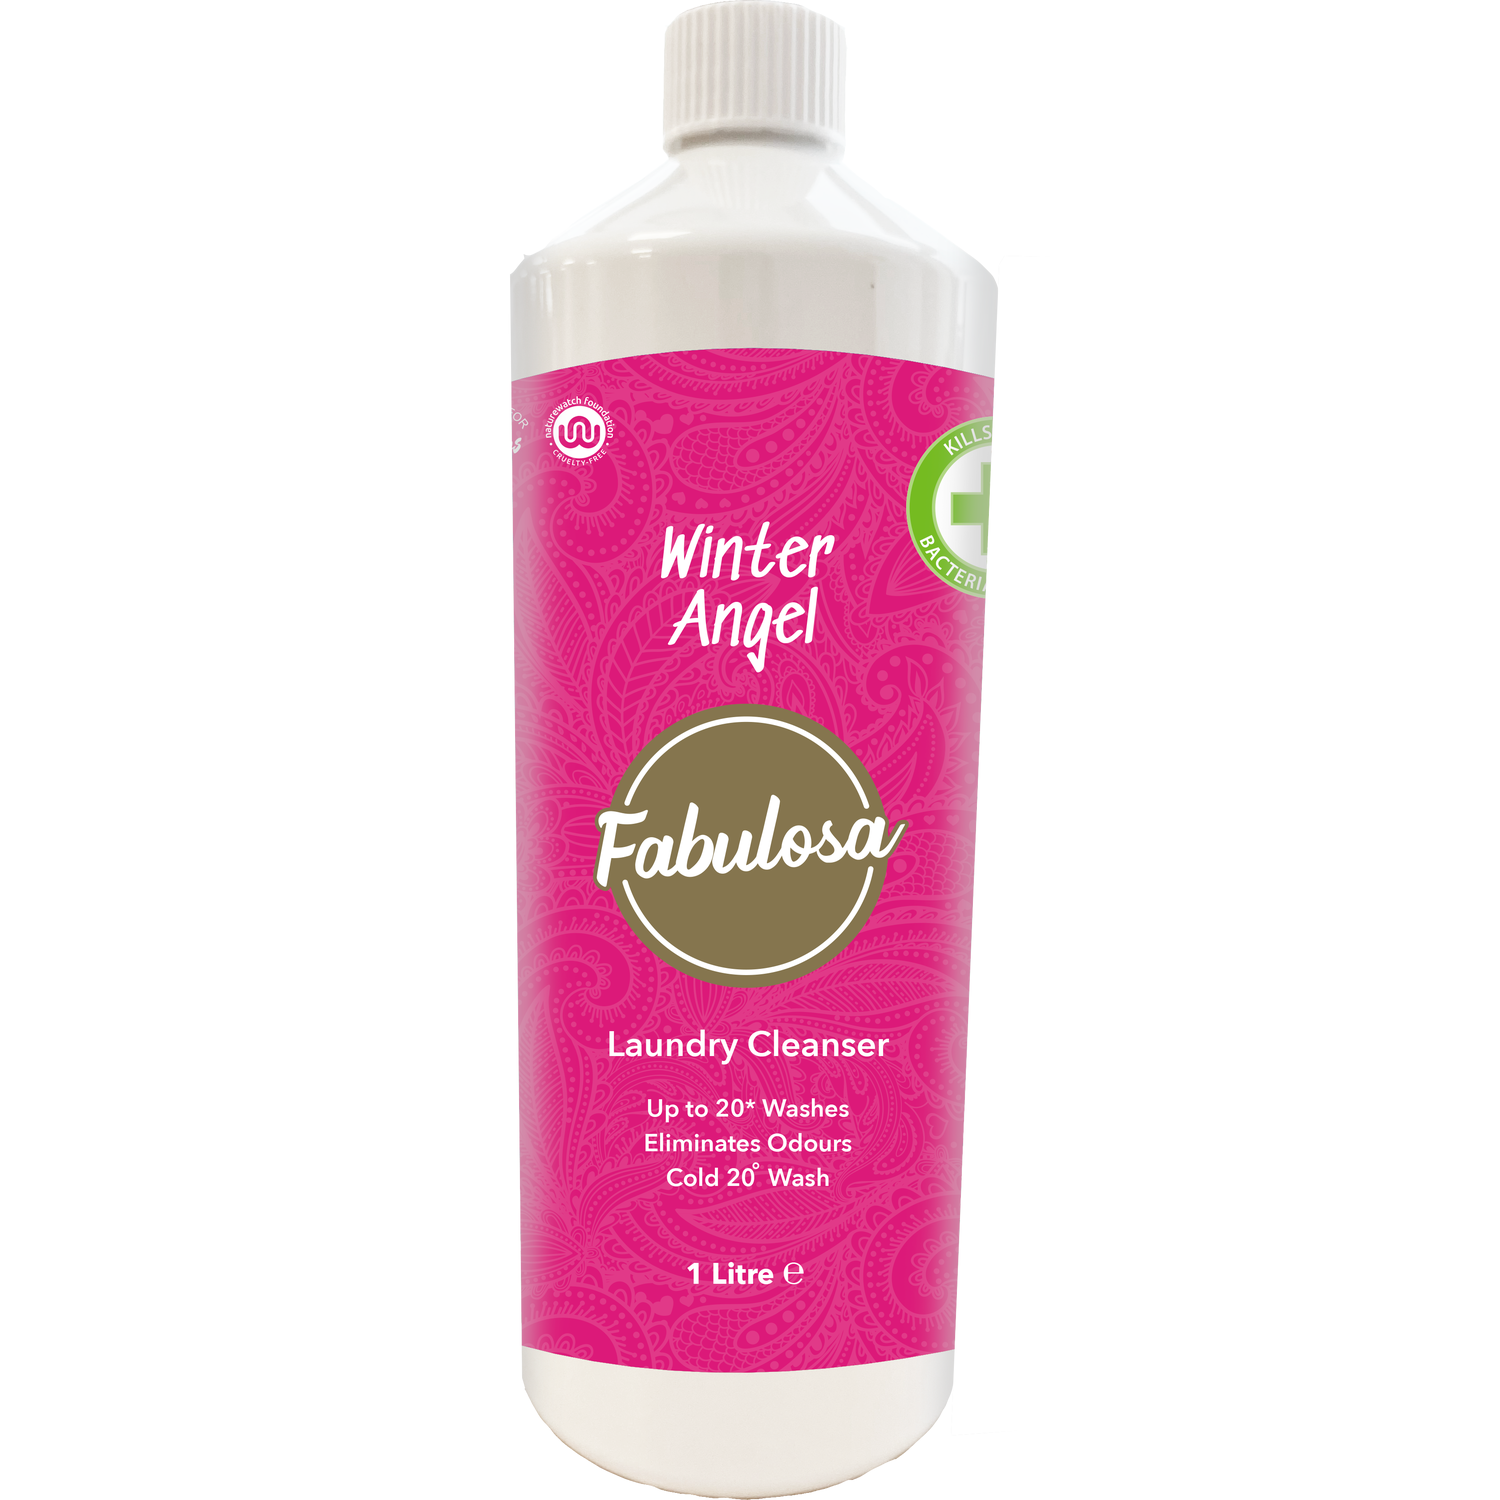 Fabulosa inter Angel Laundry Cleanser 1L Image